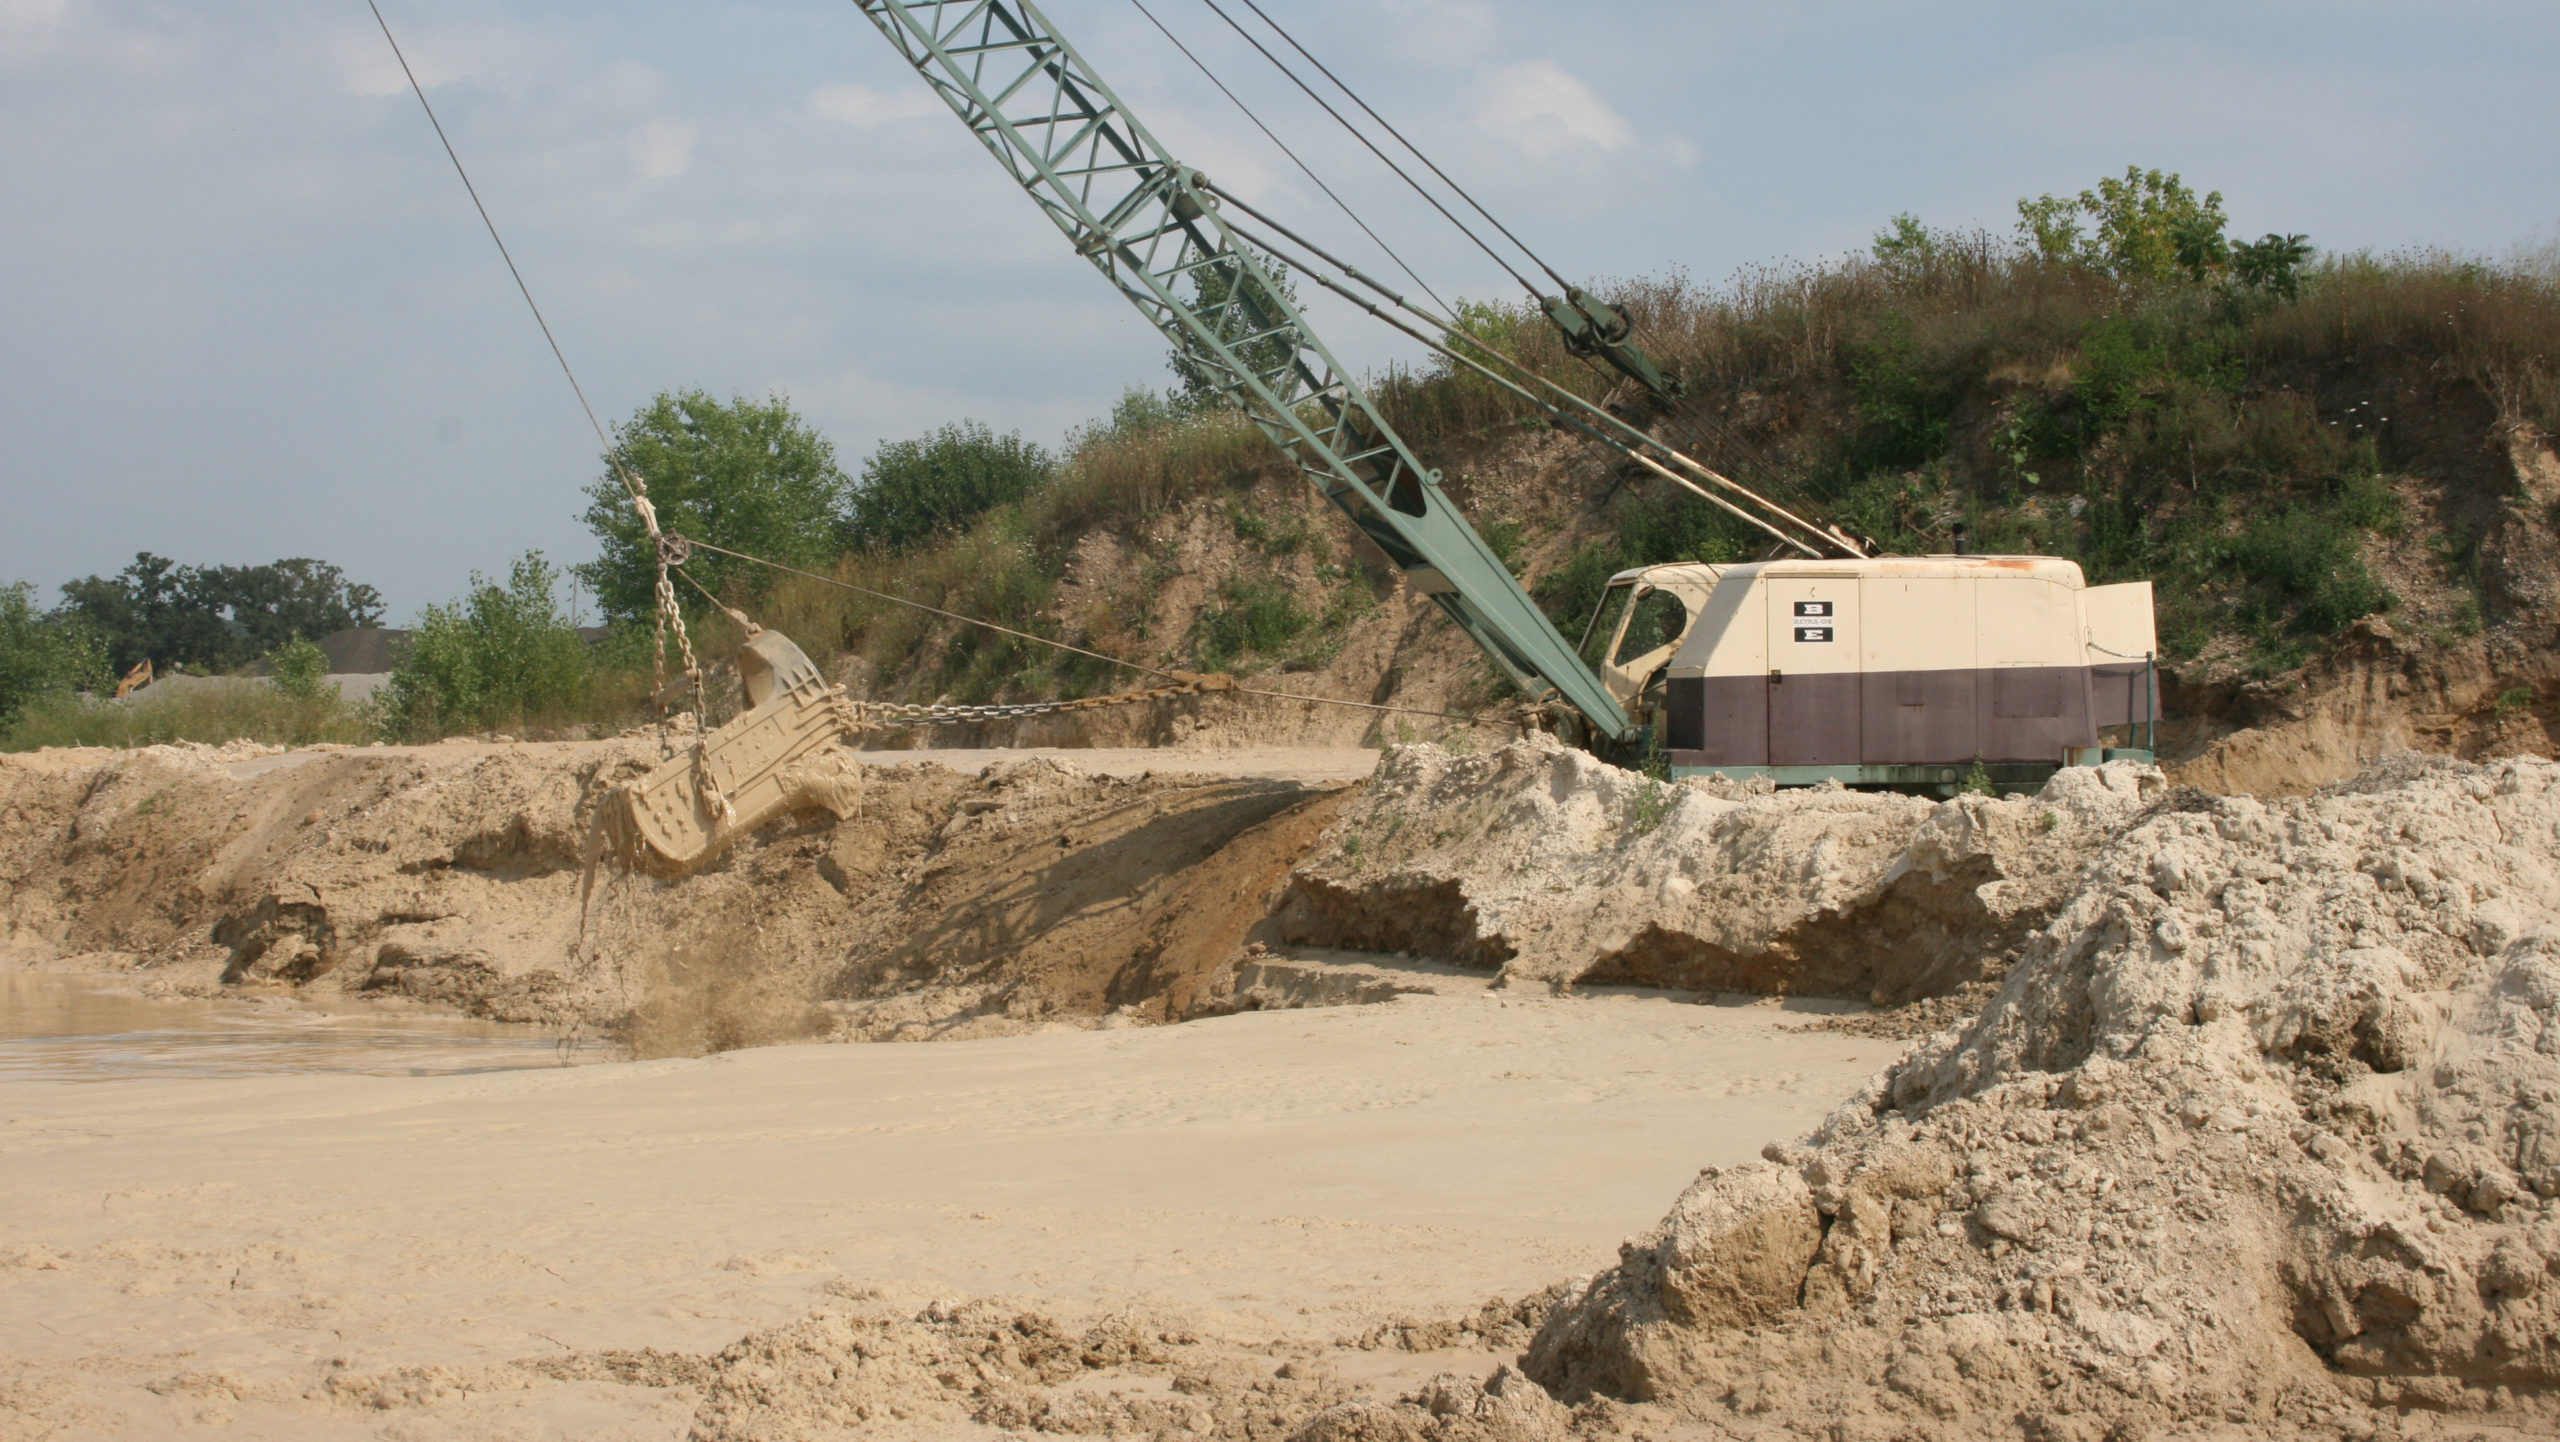 A tan and brown dragline crawler crane dredging a pond with stacked sand in the foreground.